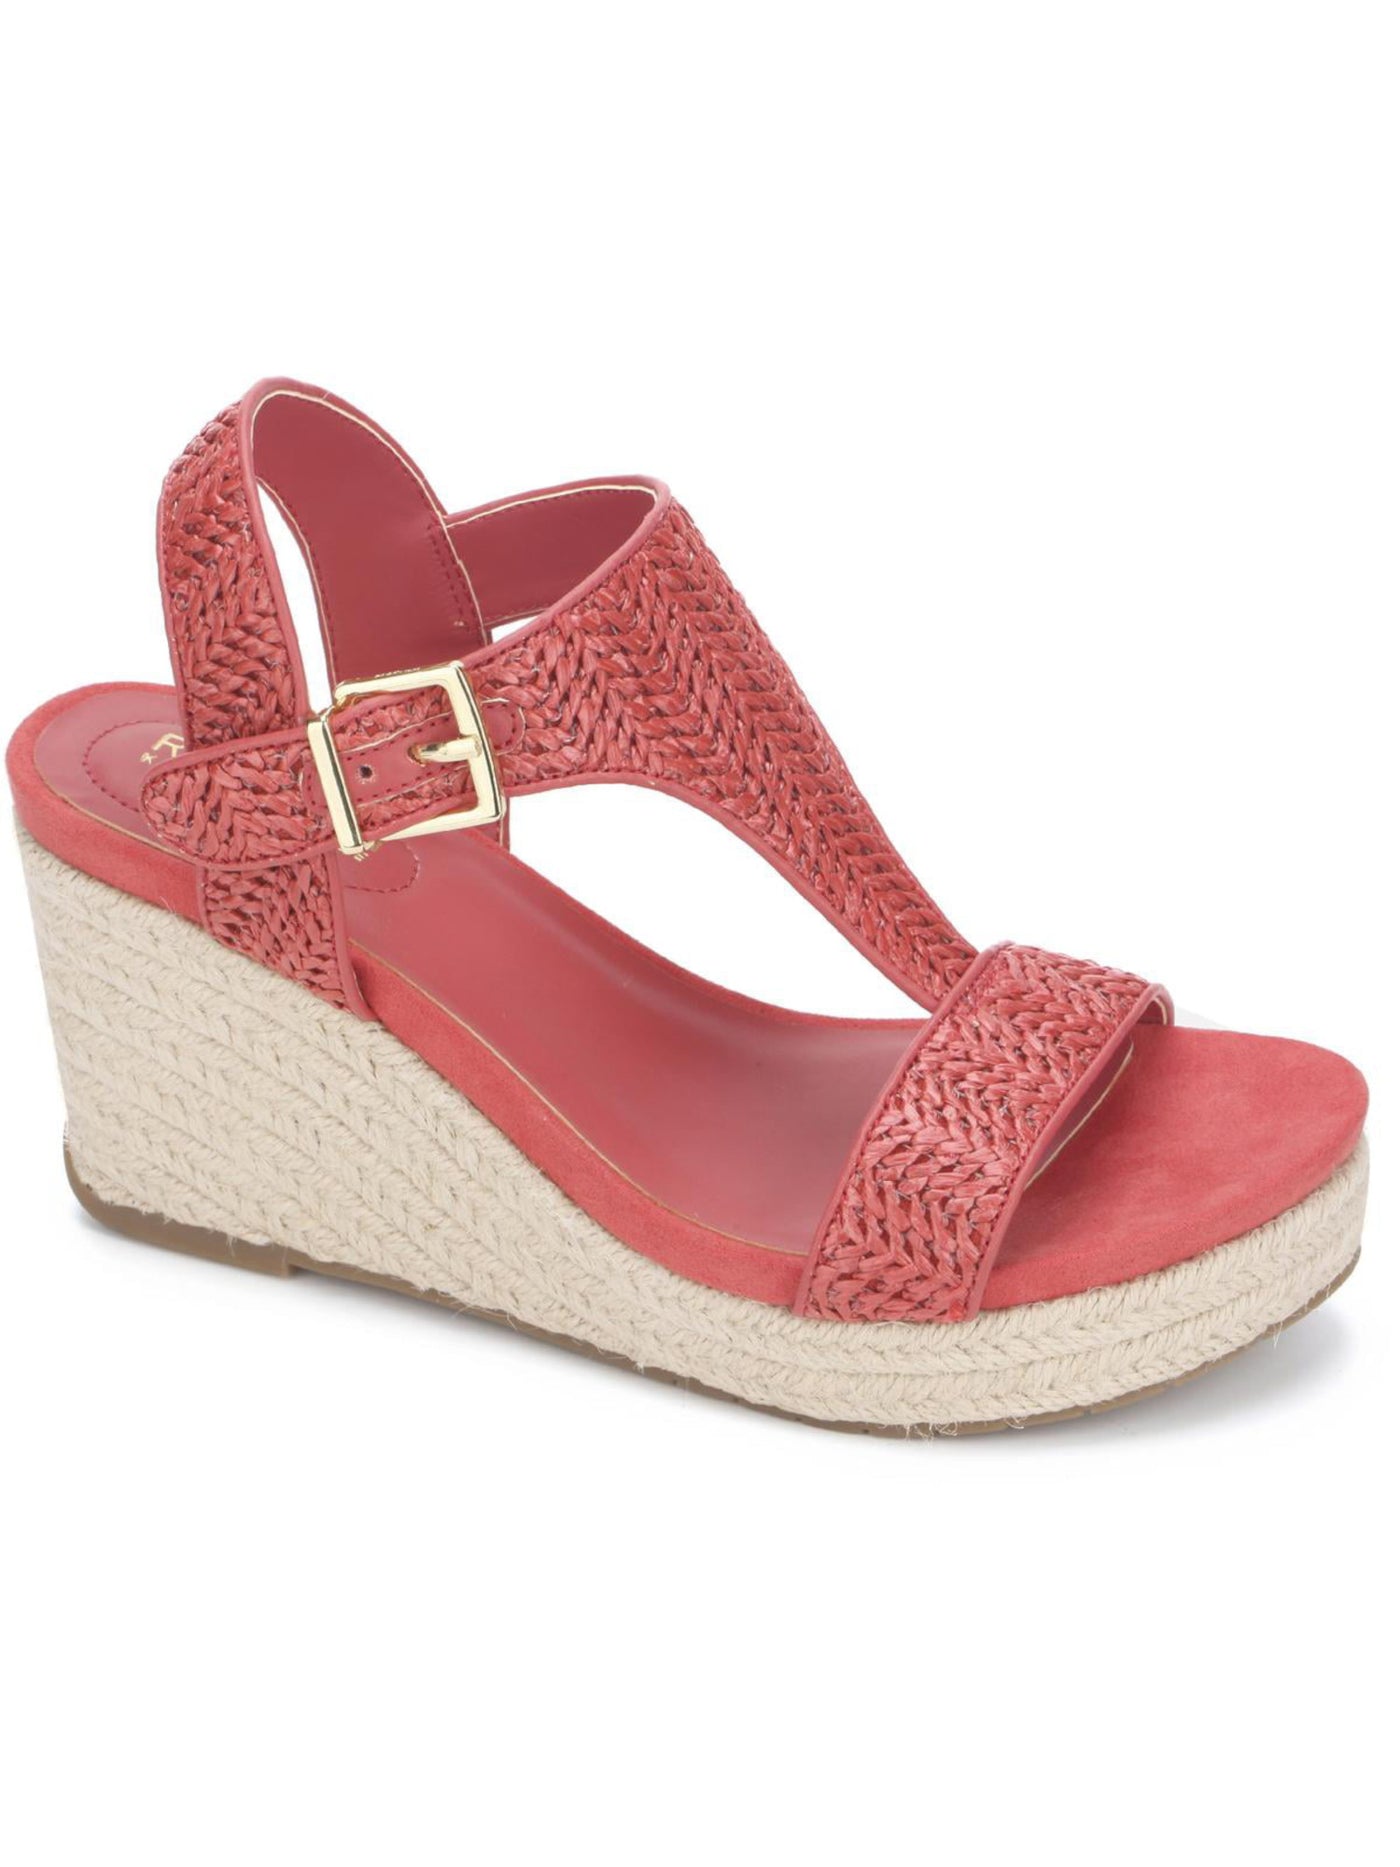 REACTION KENNETH COLE Womens Coral Woven Adjustable Card Round Toe Wedge Buckle Espadrille Shoes 9.5